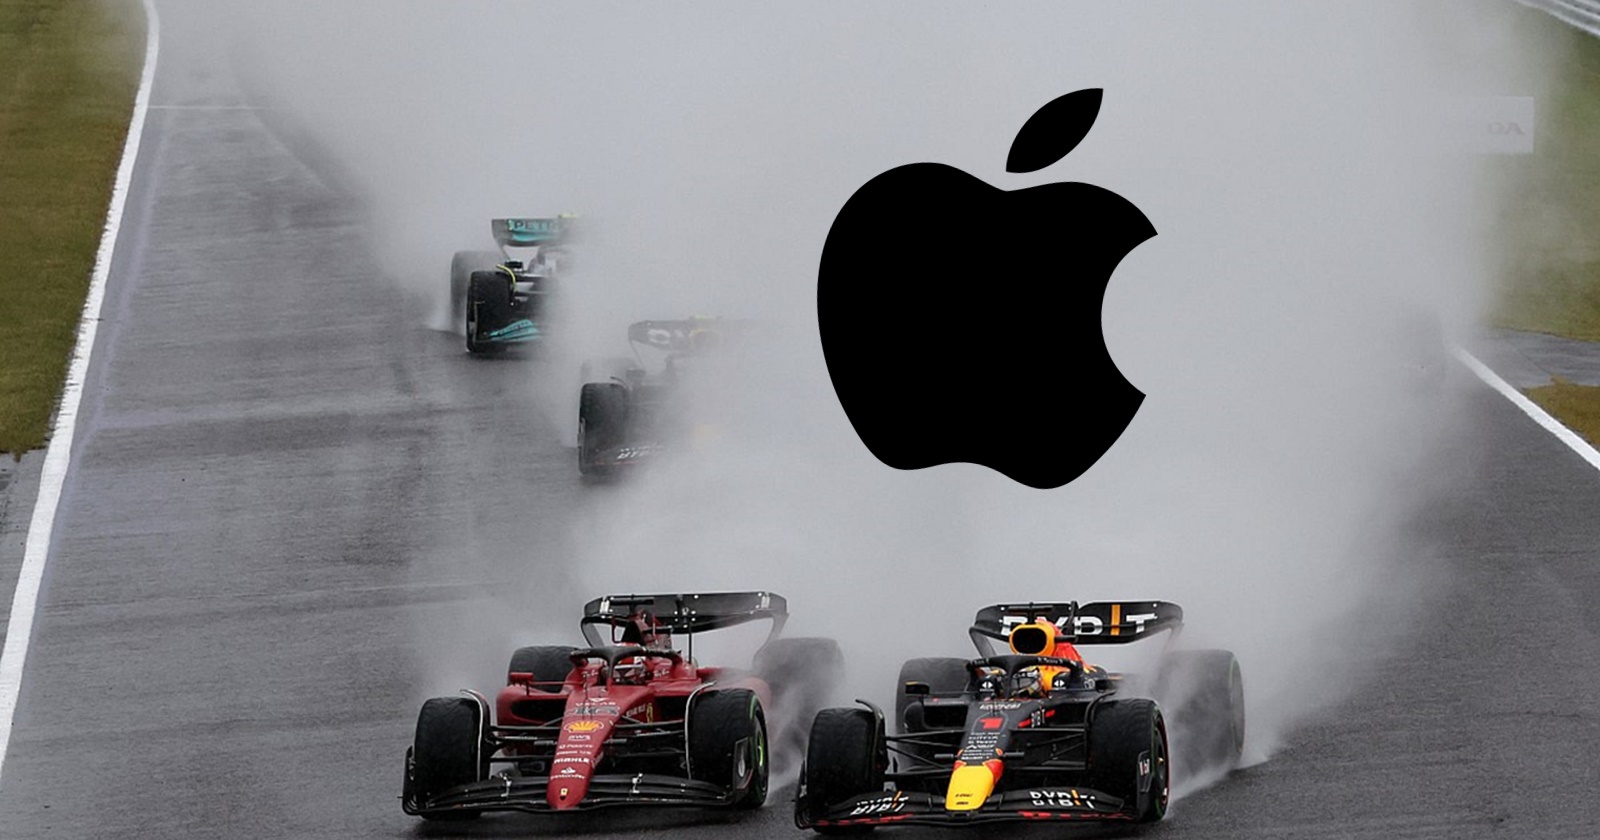 Apple is reportedly looking Formula 1 rights for $2 billion